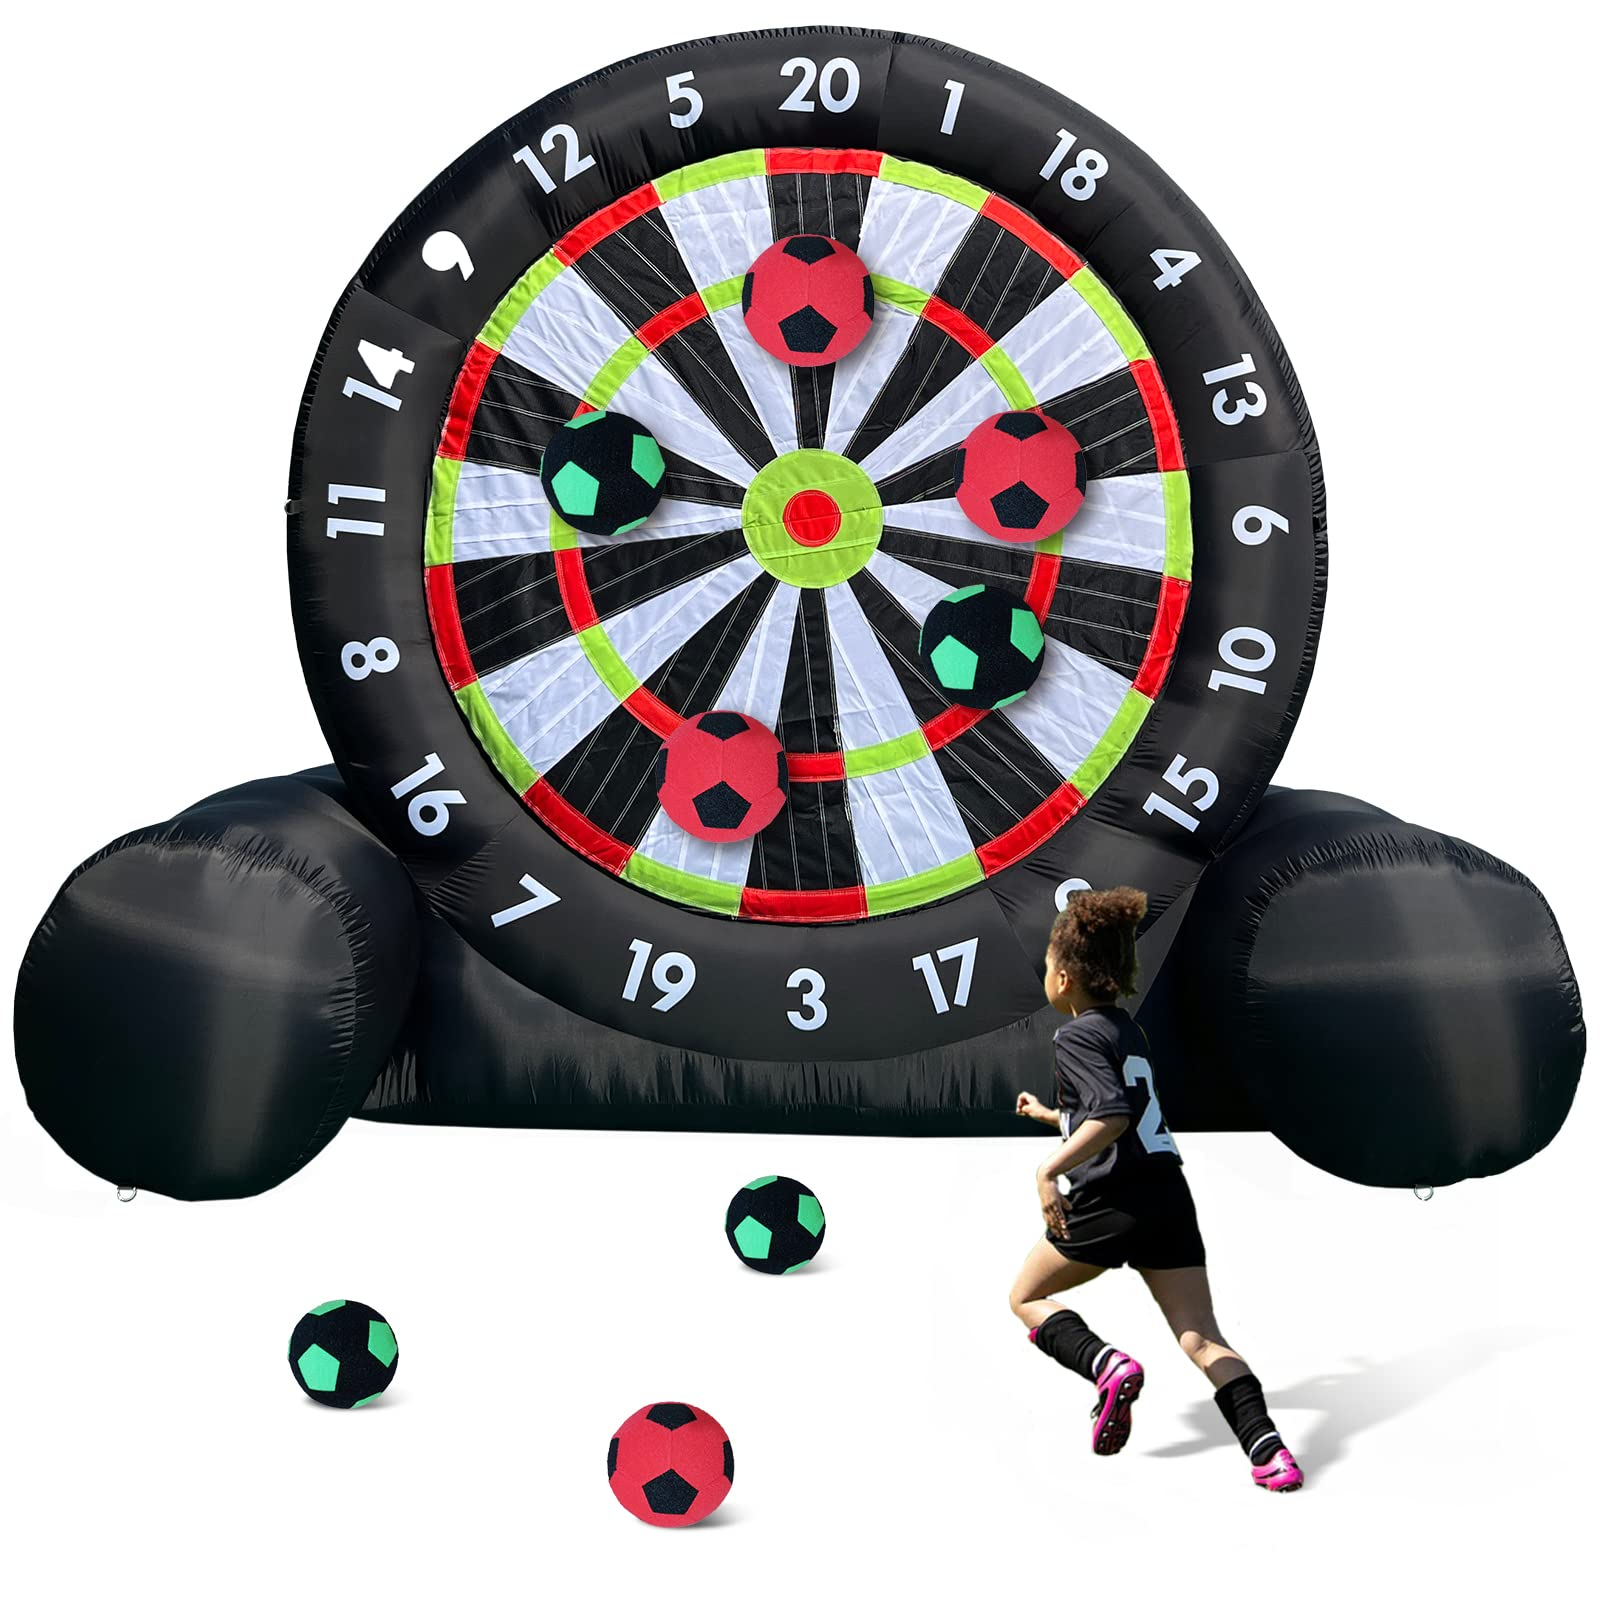 OZIS 10Ft Tall Giant Inflatable Soccer Ball Darts Board with 8pcs Soccer Ball & 350W Blower - Support Frame for Kick Dartboard Sport Game for Outdoor Backyard Active Play for Kids and Adults